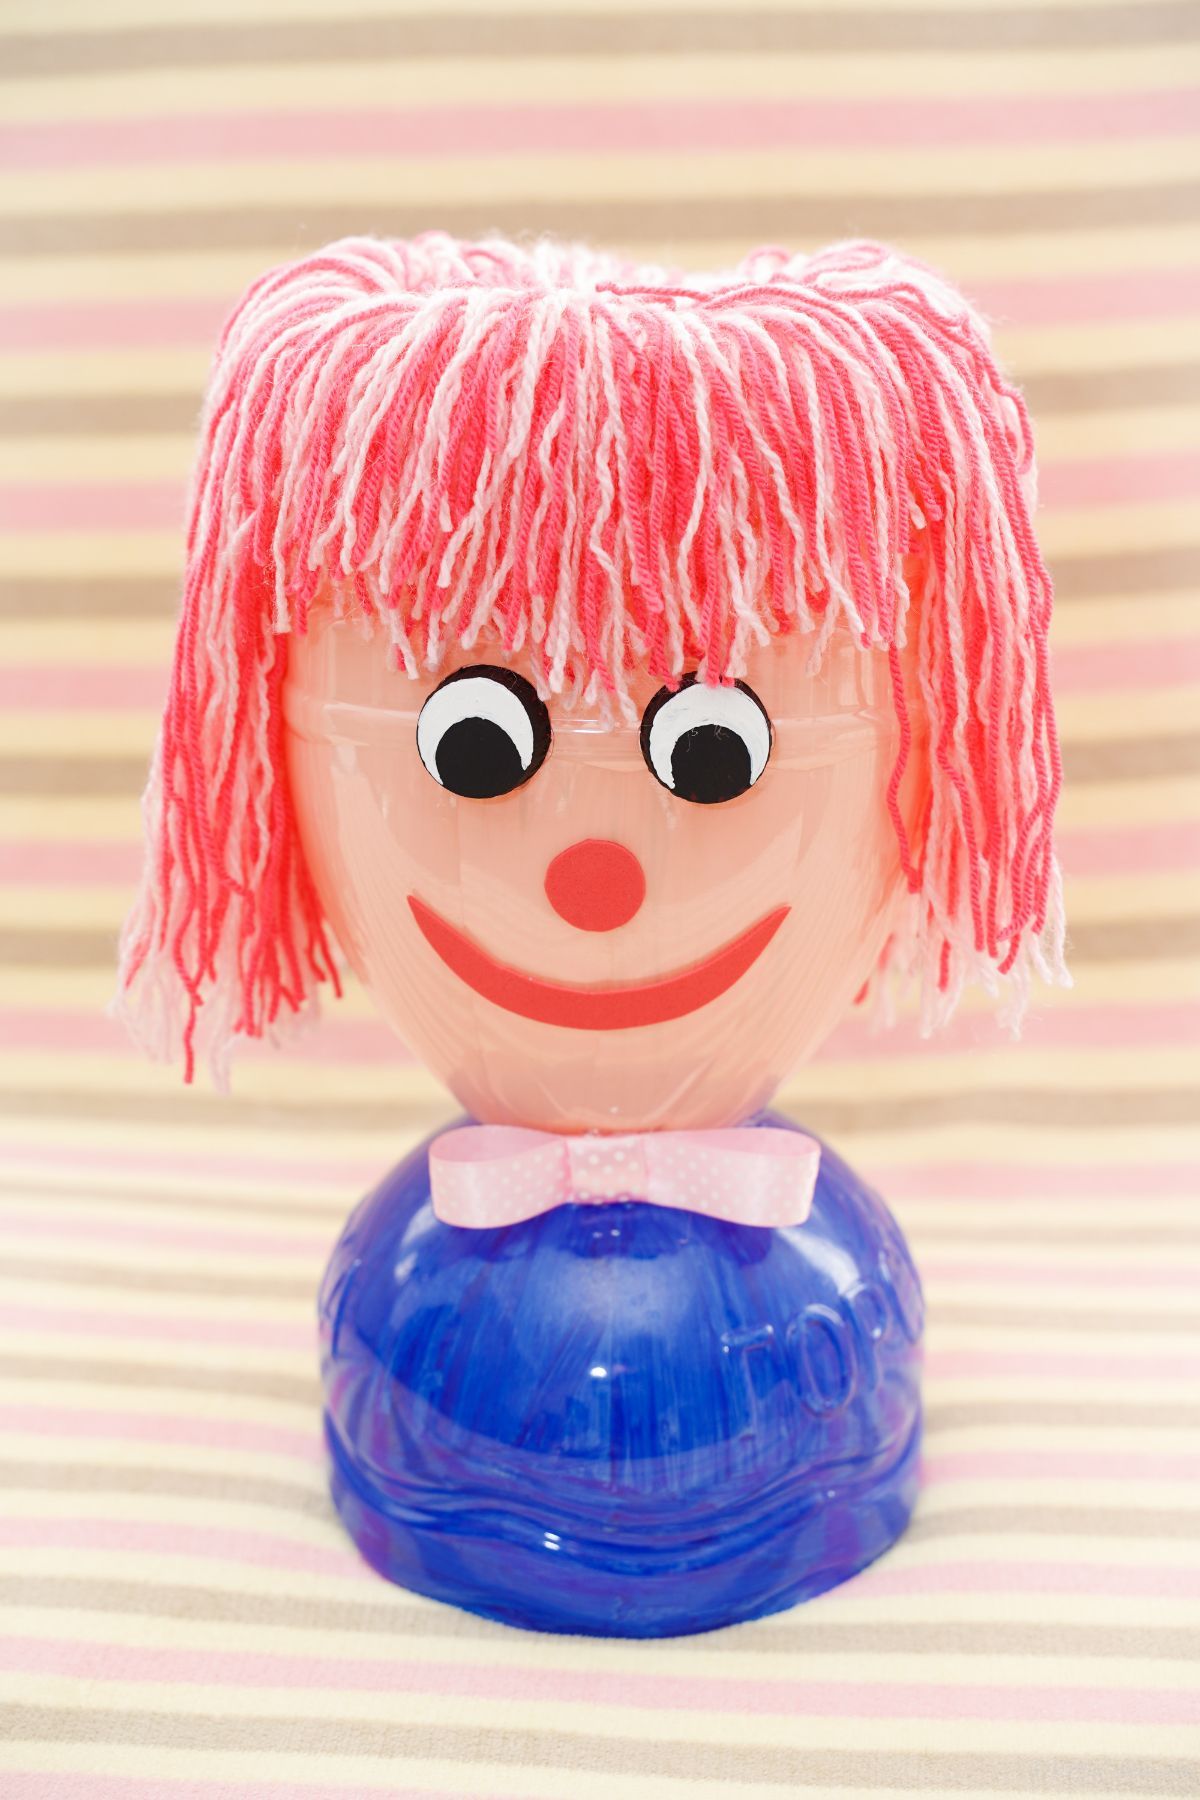 striped background behind bottle doll with pink yarn hair